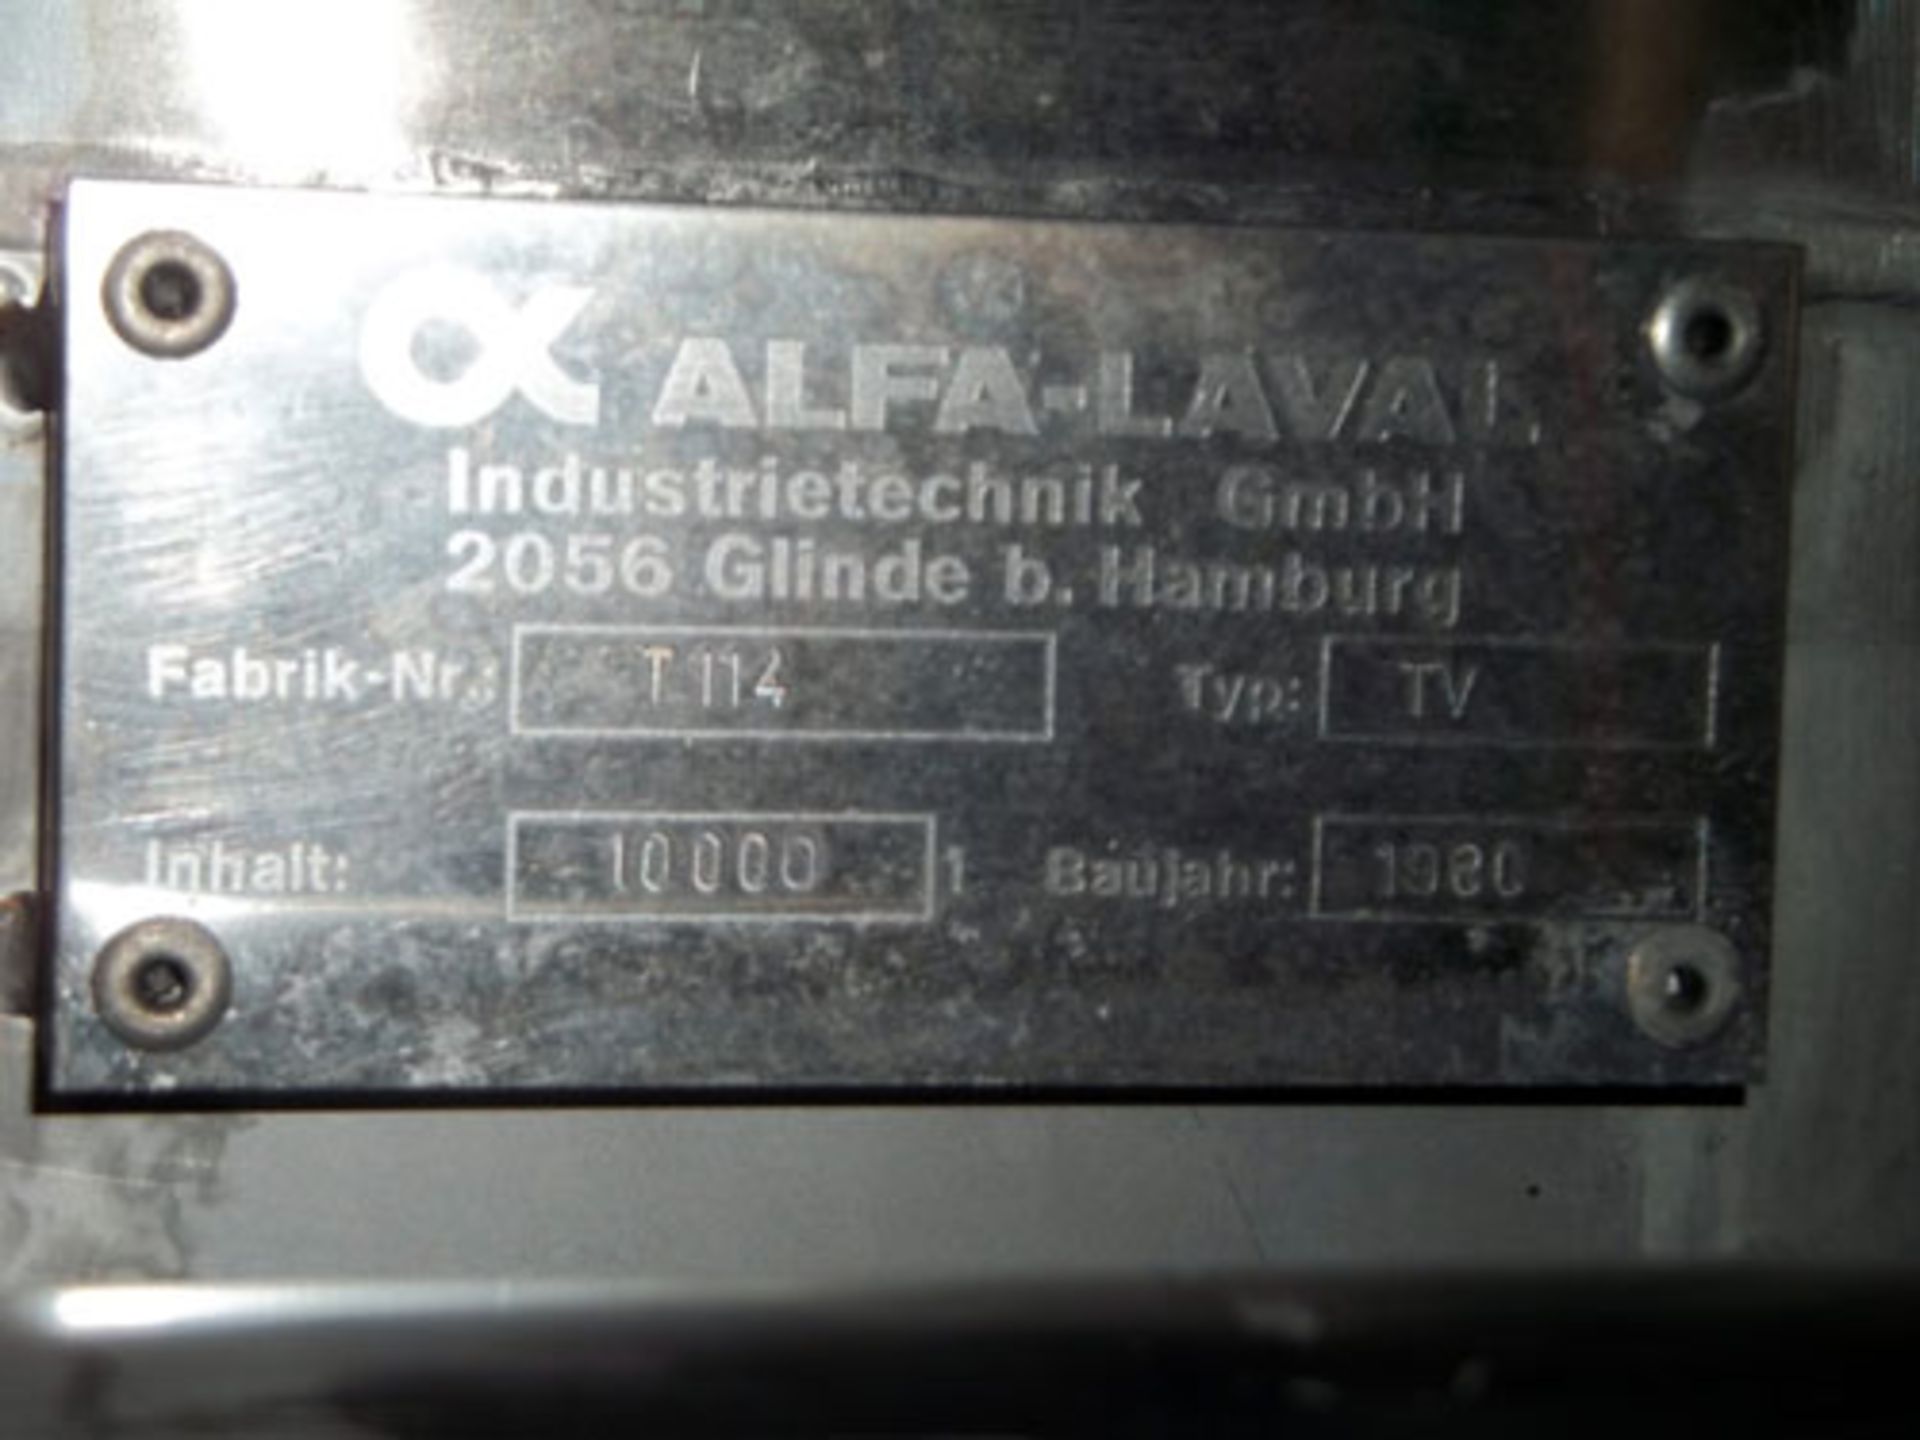 Alfa-Laval Tank, 10000 Liter (2641 Gallon), Type TV, Stainless Steel, Vertical. Coned bottom. - Image 4 of 4